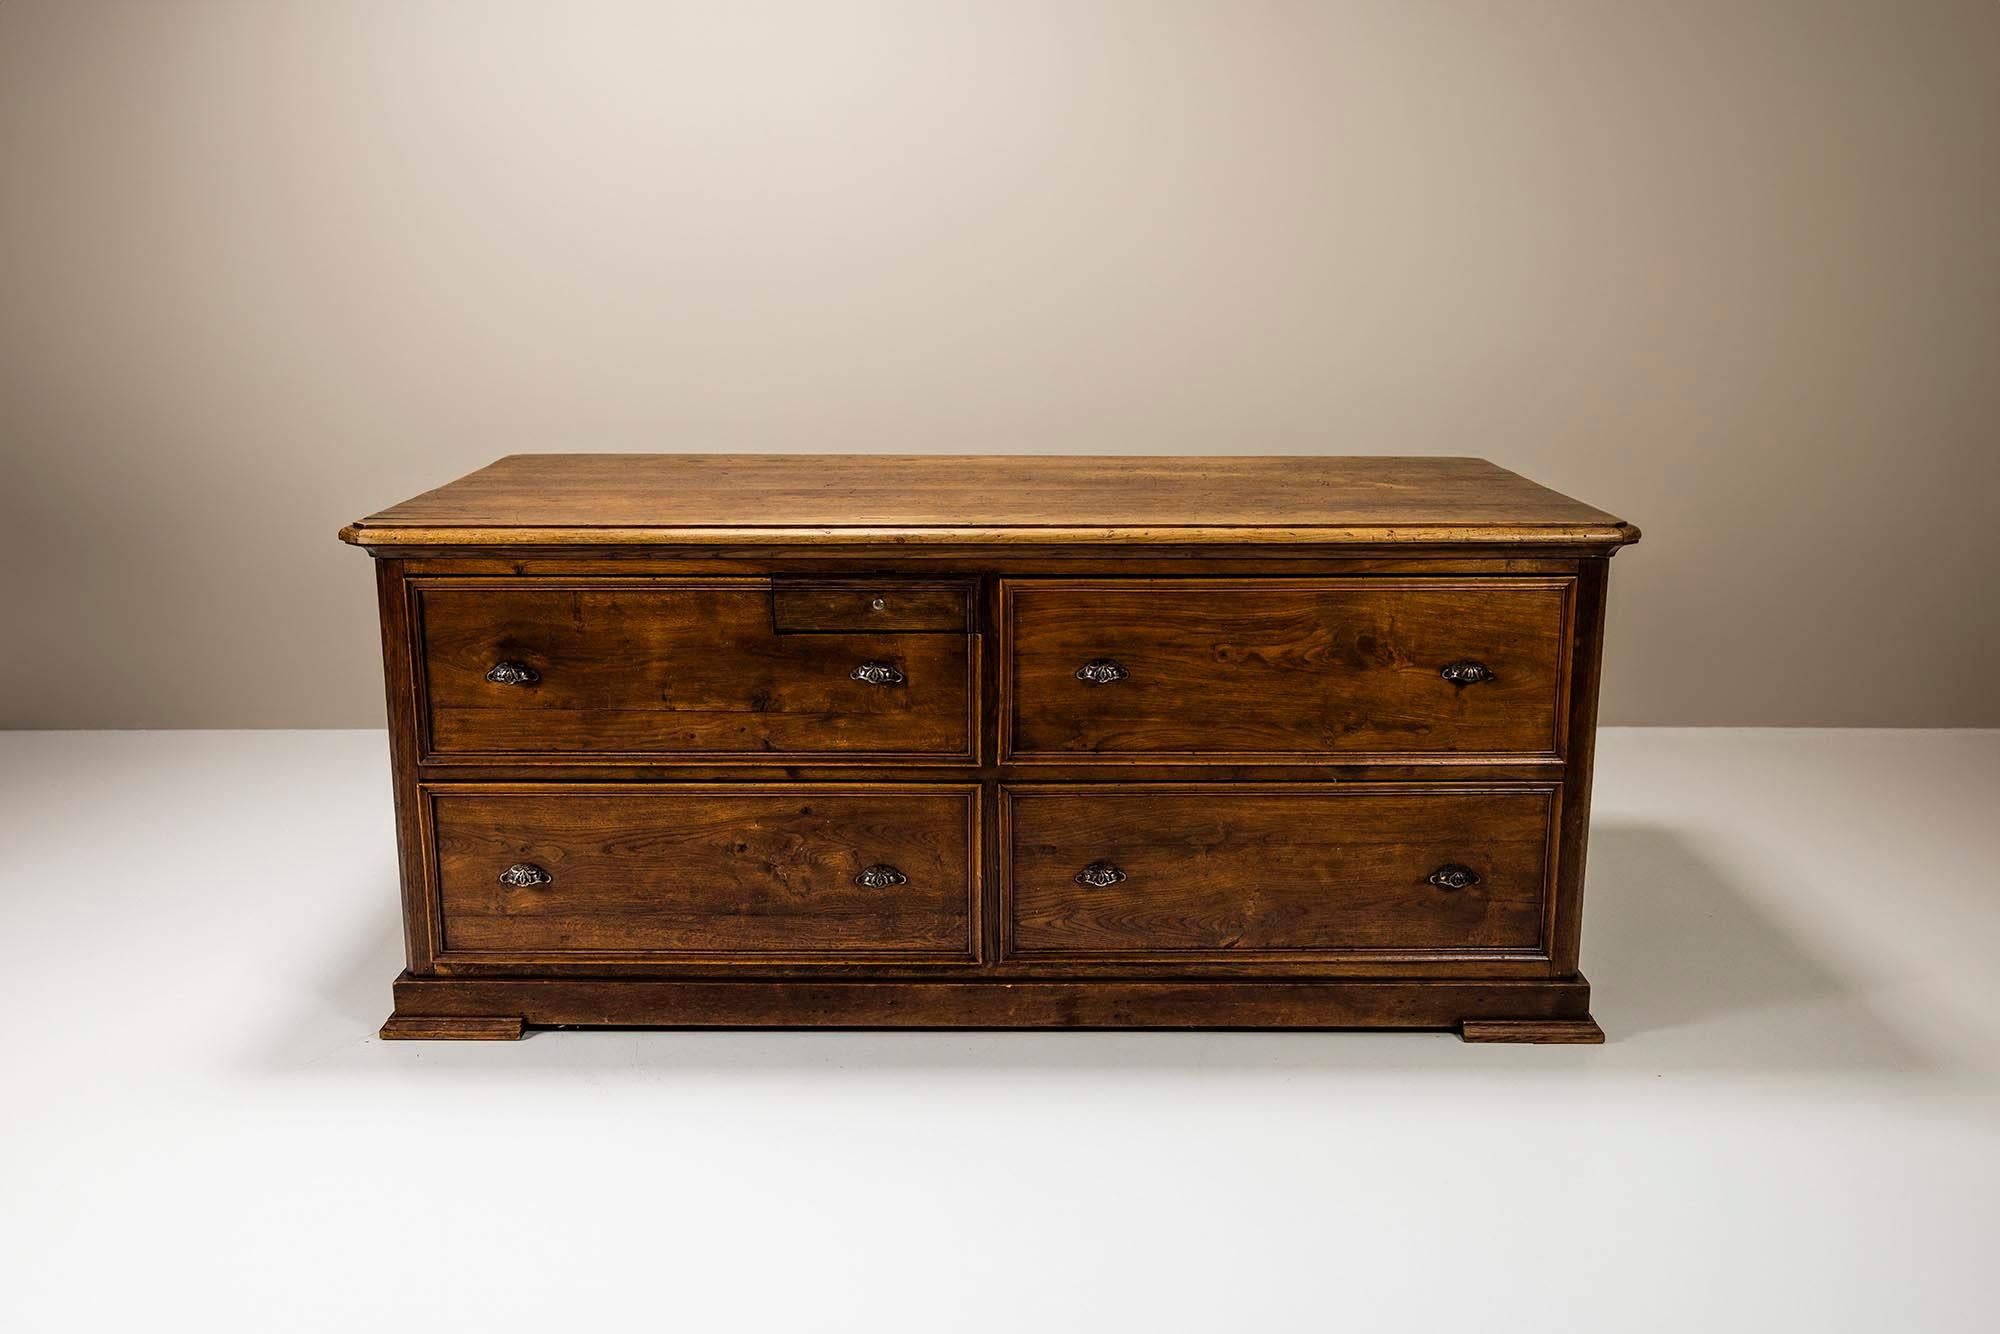 This impressive counter could easily have served in a department store like Printemps in the 1920s and 1930s. With its many drawers and therefore considerable storage capacity, it is a practical eye-catcher drenched in the romantic appearance of Art